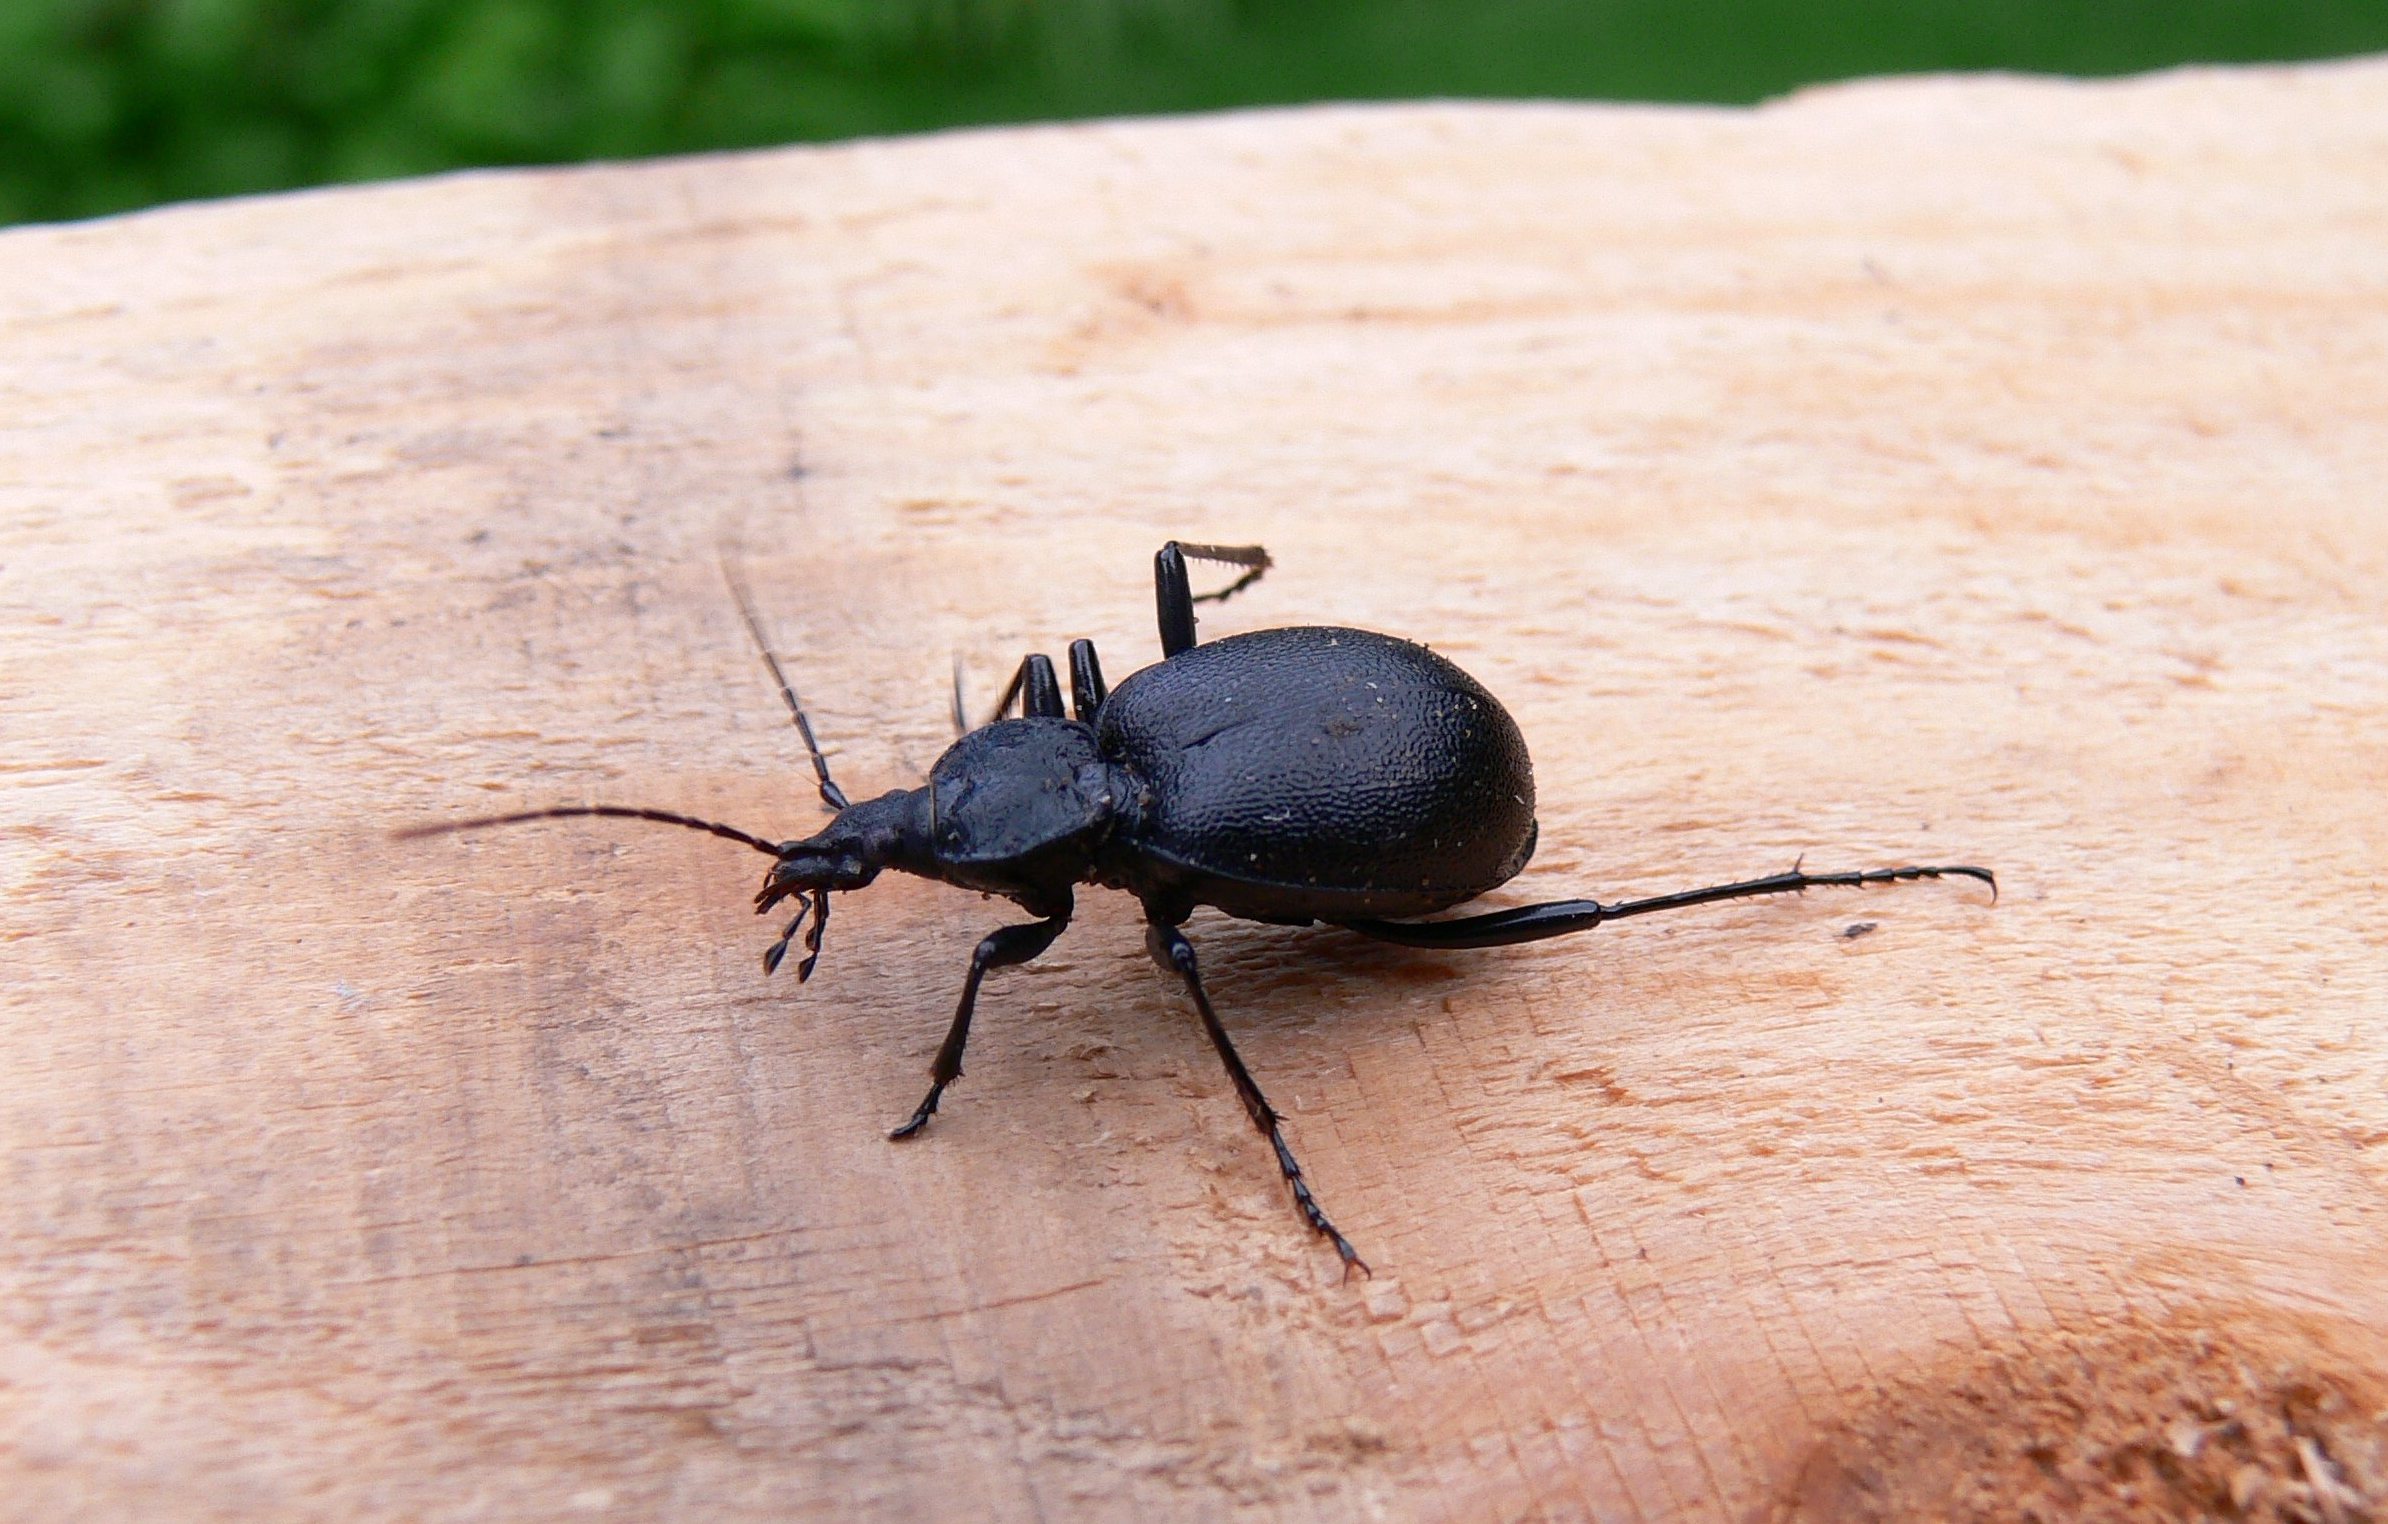 Cychrus caraboides is a snail eating beetle. Its head and pronotum are narrowed so that it can get into snails' shells. Its elytra are fused which better protects its body but means that it can no longer fly.